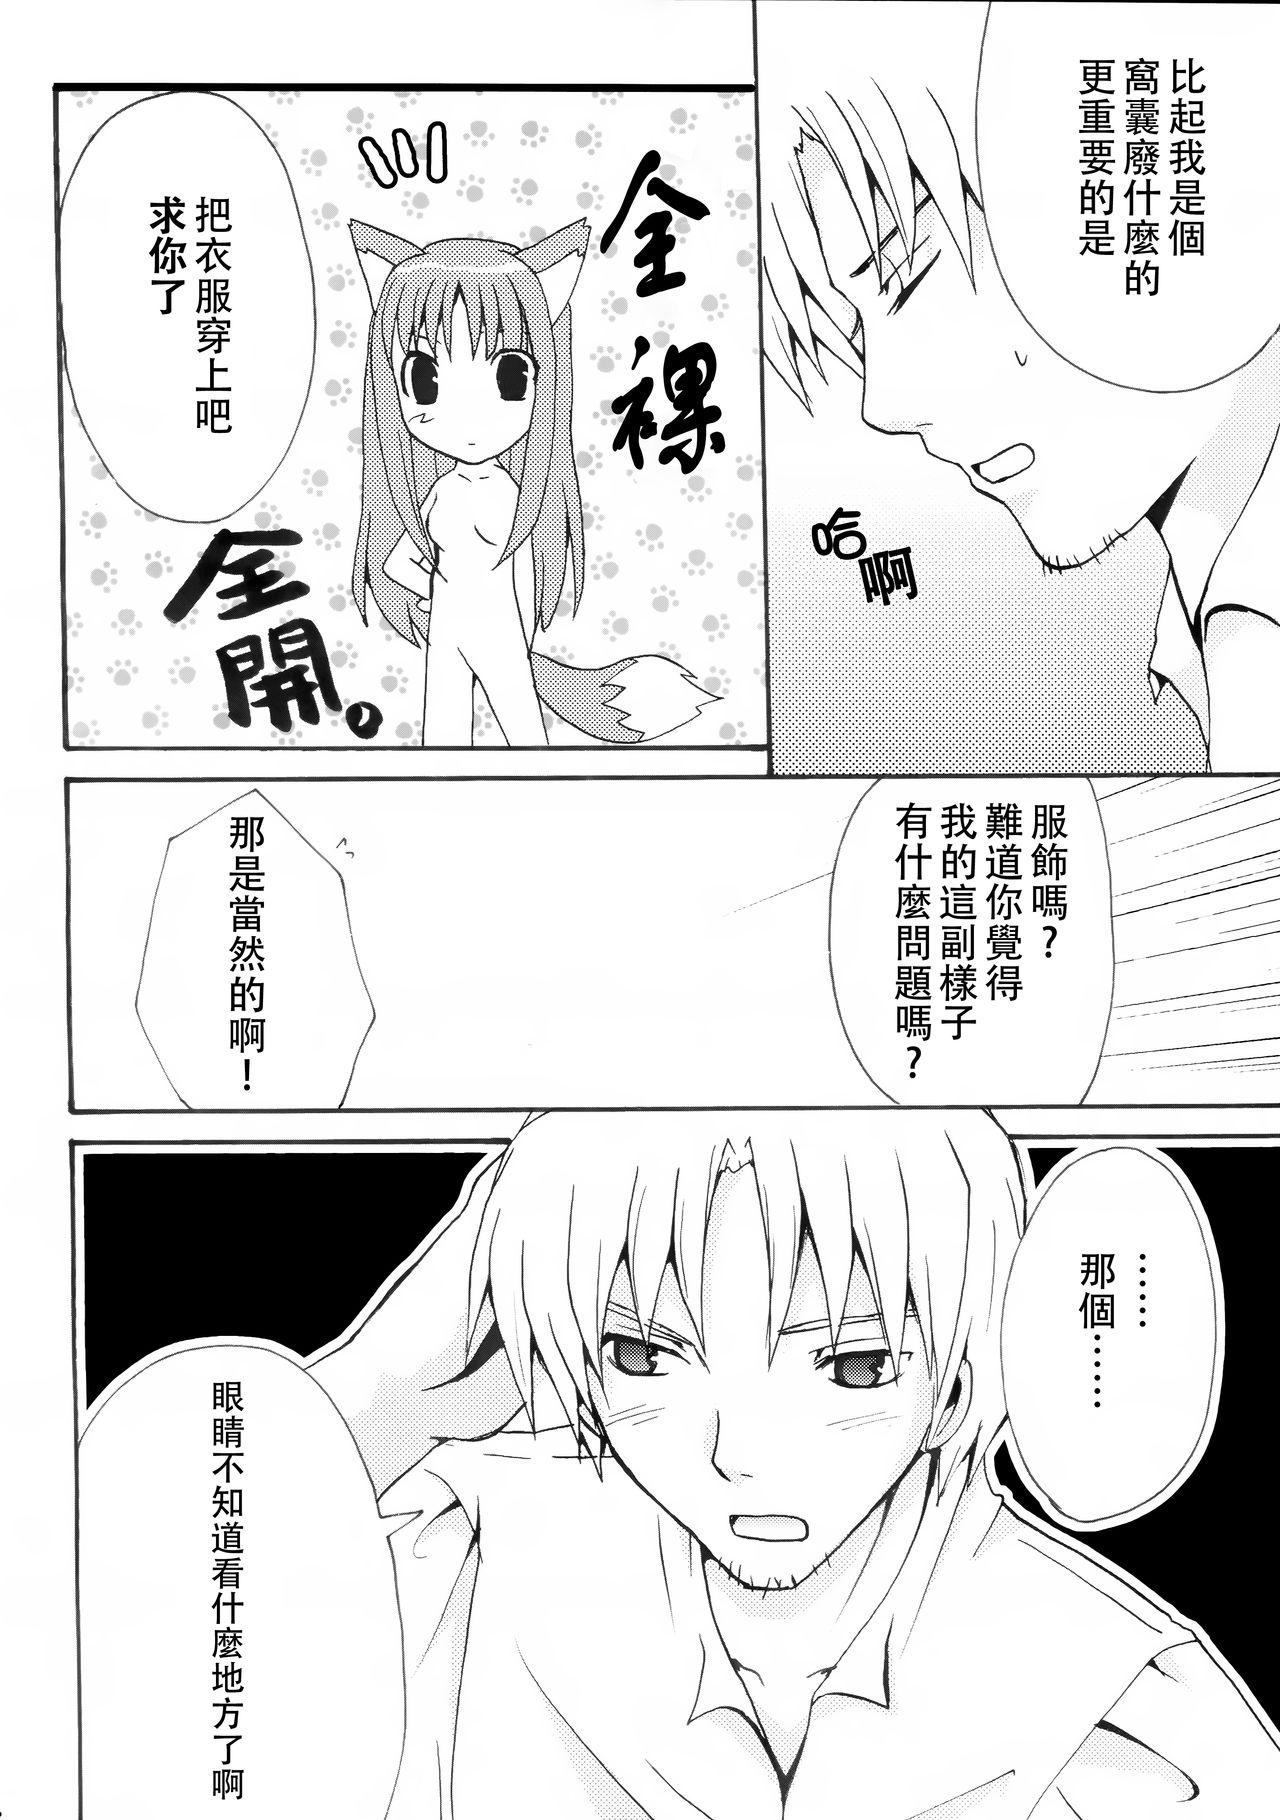 Nice Ass Rosemary - Spice and wolf Jeune Mec - Page 6